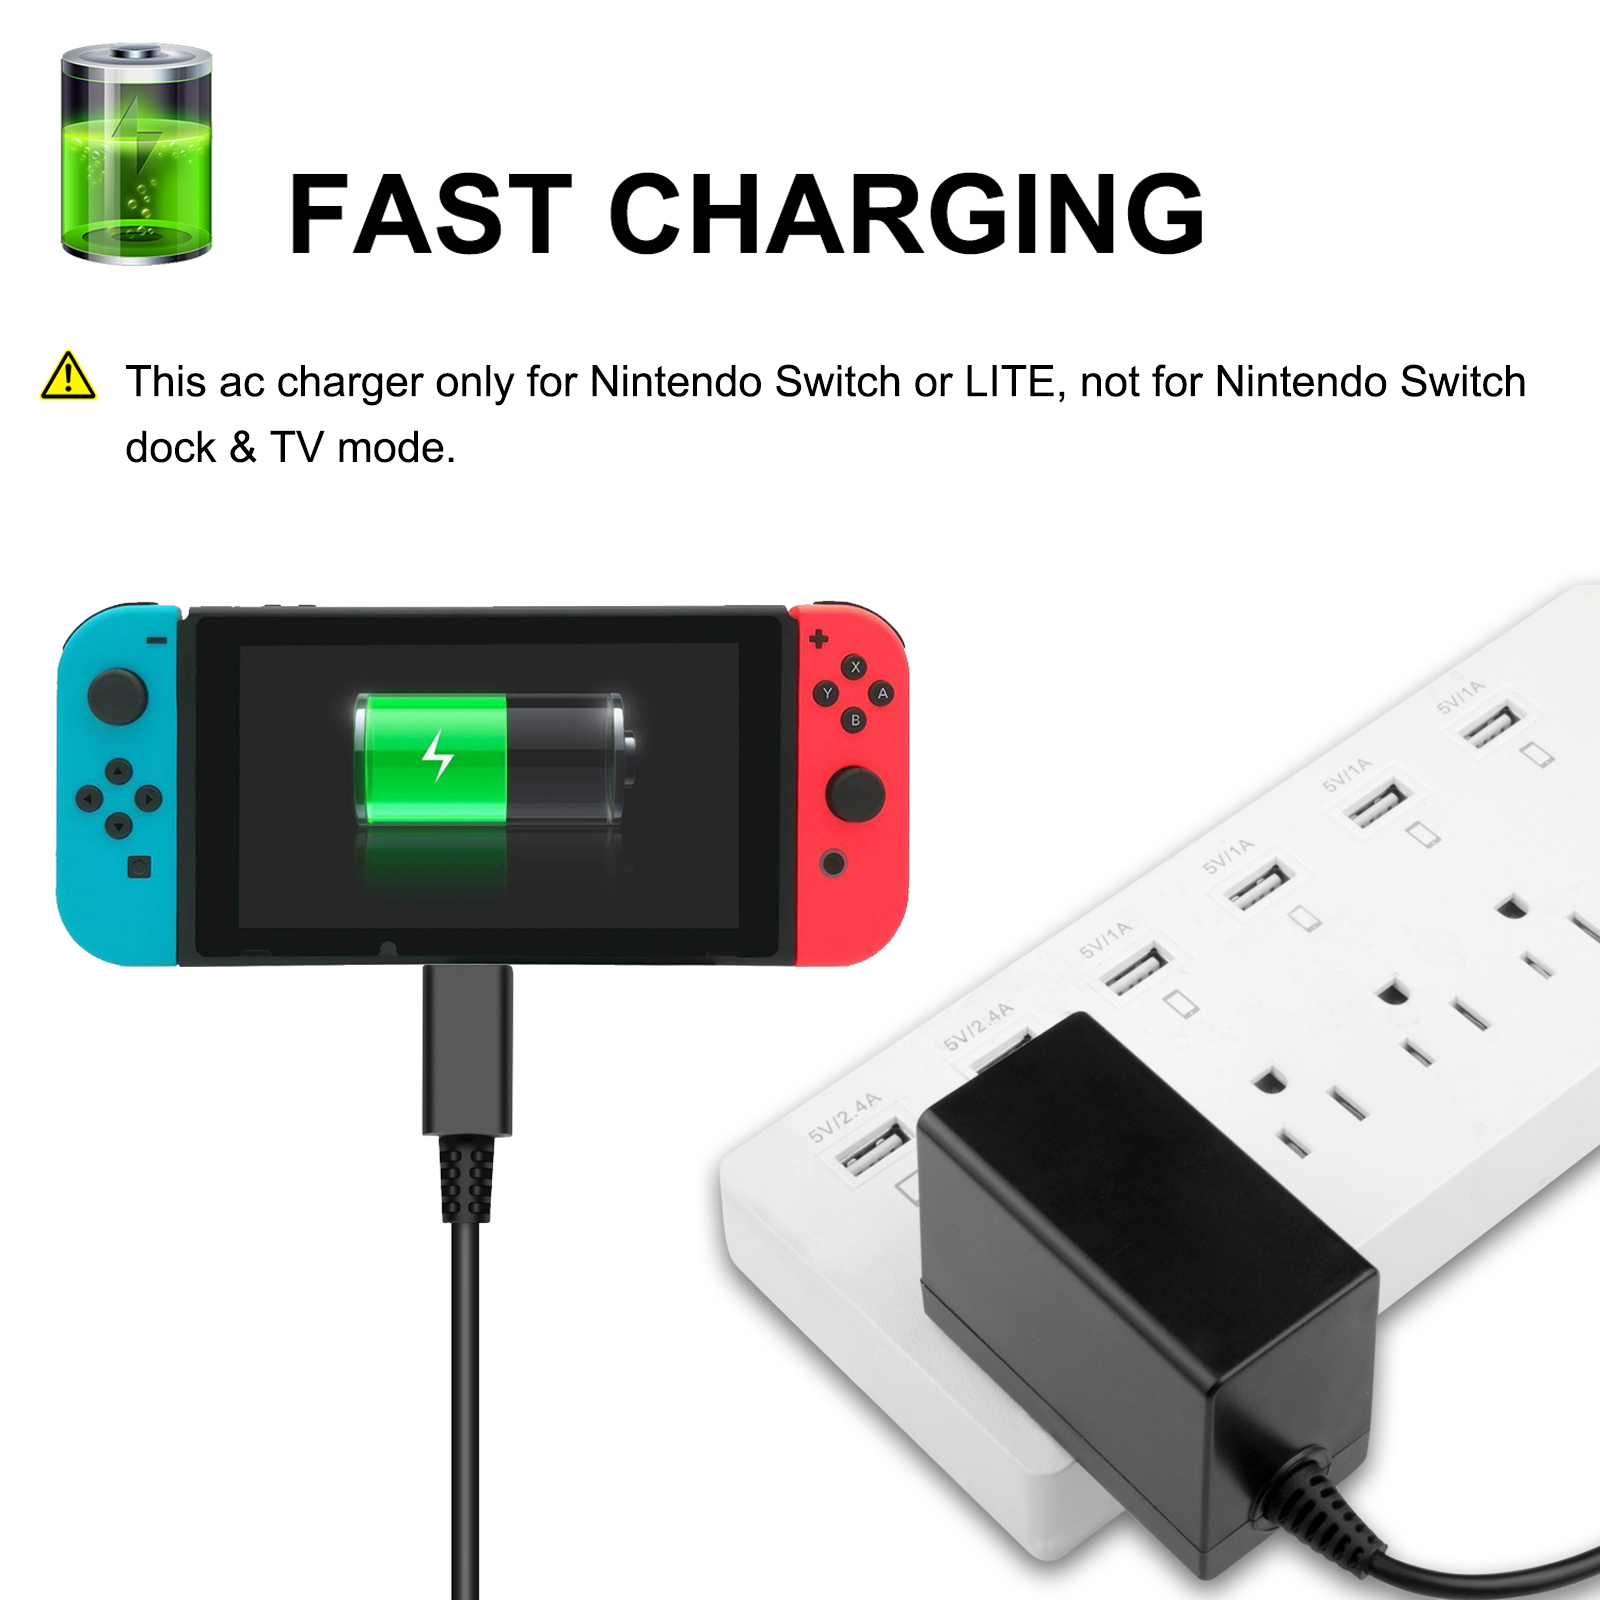  Charger for Nintendo Switch,OLED Charger Compatible with Nintendo  Switch/Switch Lite/Switch Dock, Fast Travel Charger with 5FT Type-c Cable  for Samsung Galaxy S9 and Support TV Mode : Video Games